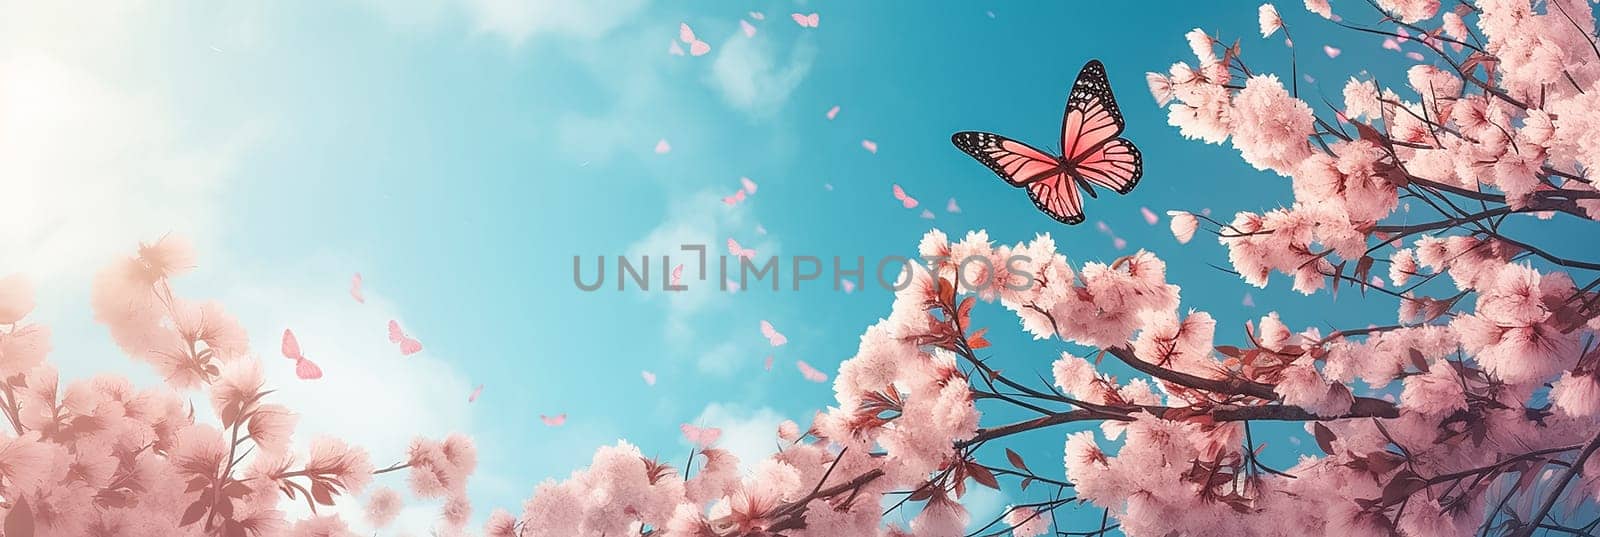 The butterfly is flies by Pink cherry blossoms branch on the blurred blue sky background. Long banner with Spring flowers of cherries tree.